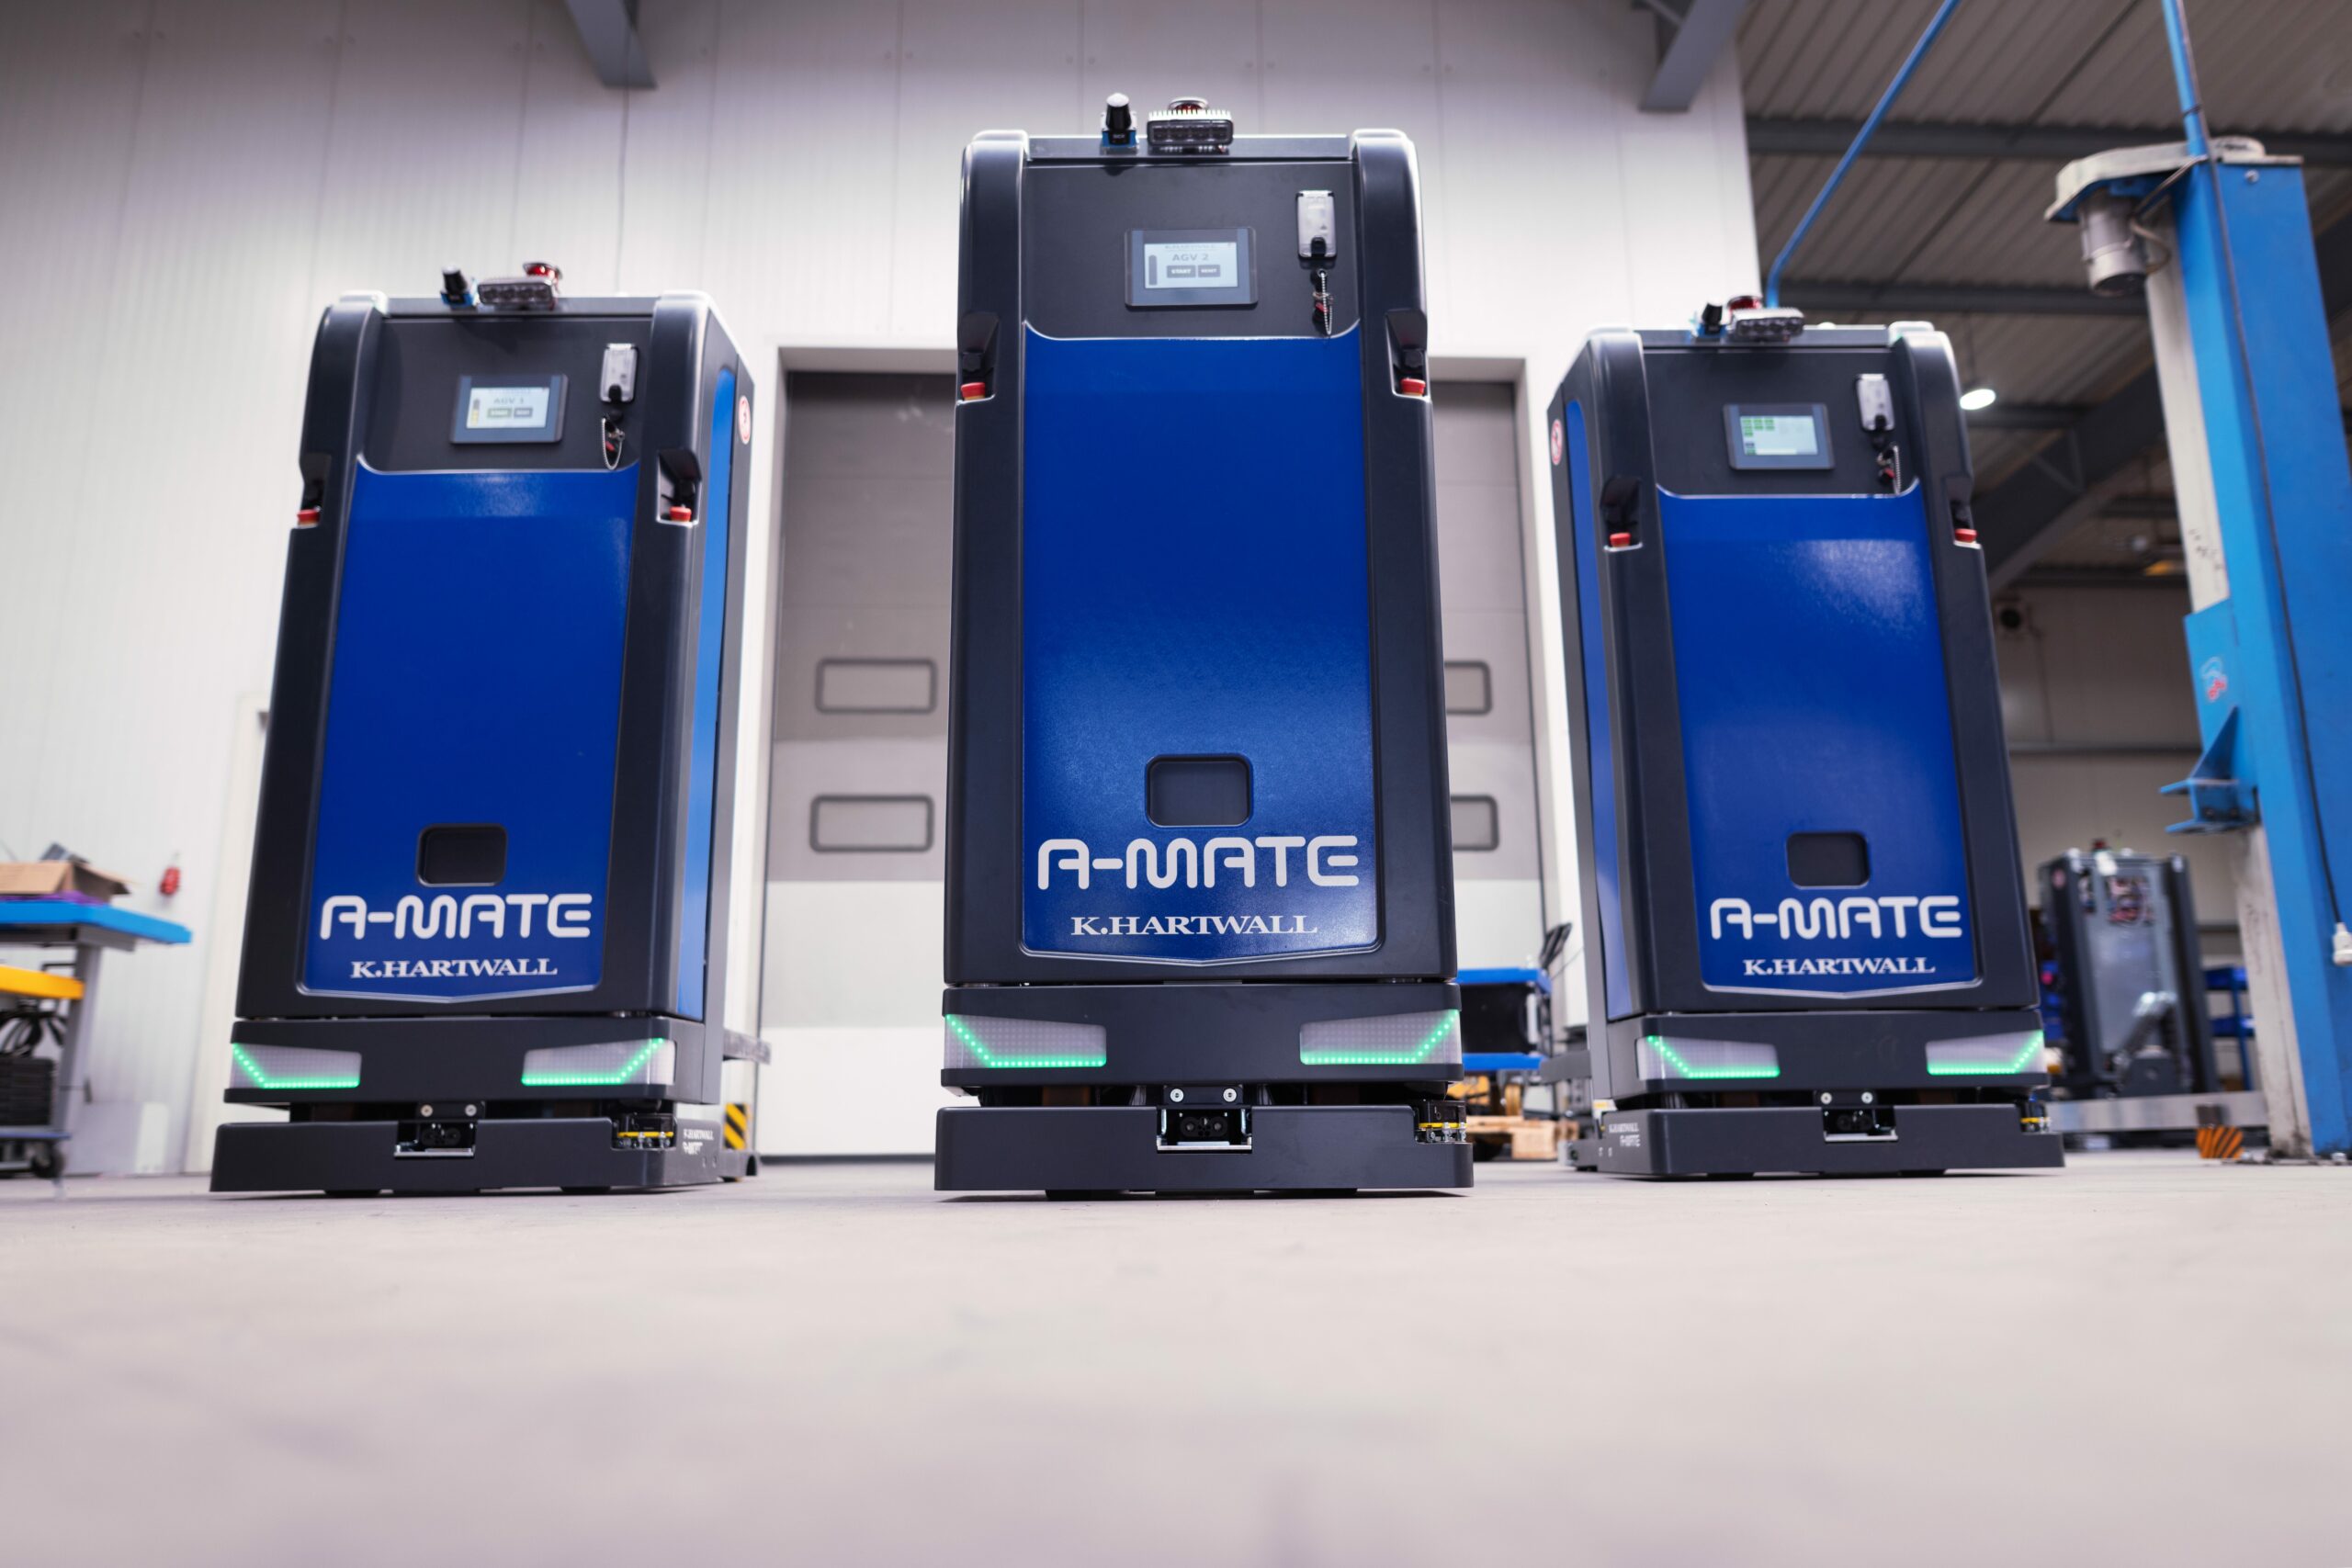 frontal view of the mobile robot product family A-MATE from K.Hartwall